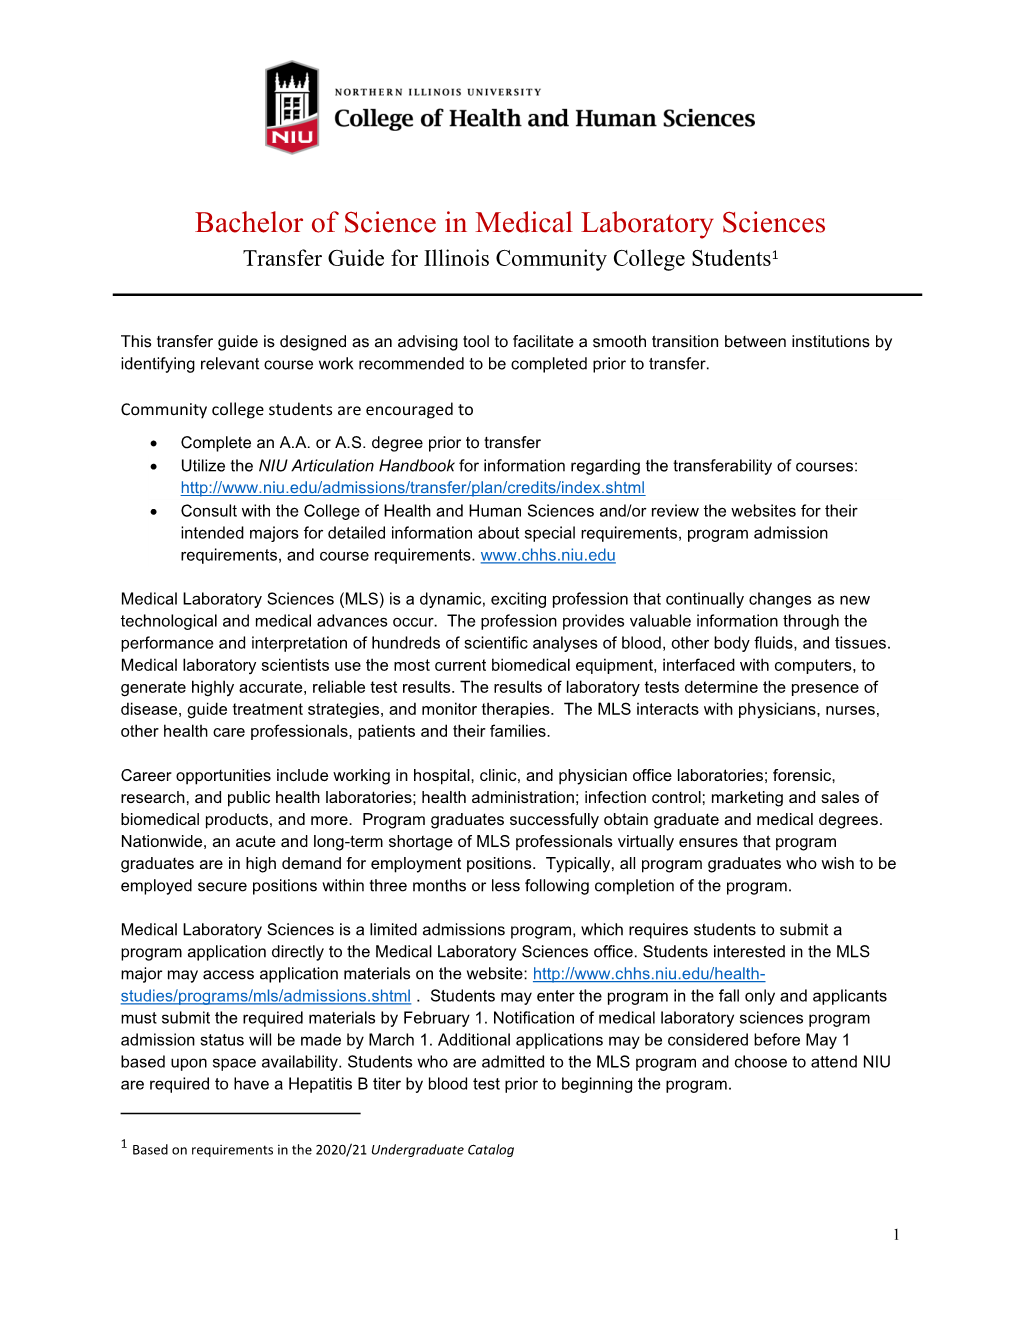 Bachelor of Science in Medical Laboratory Sciences Transfer Guide for Illinois Community College Students1